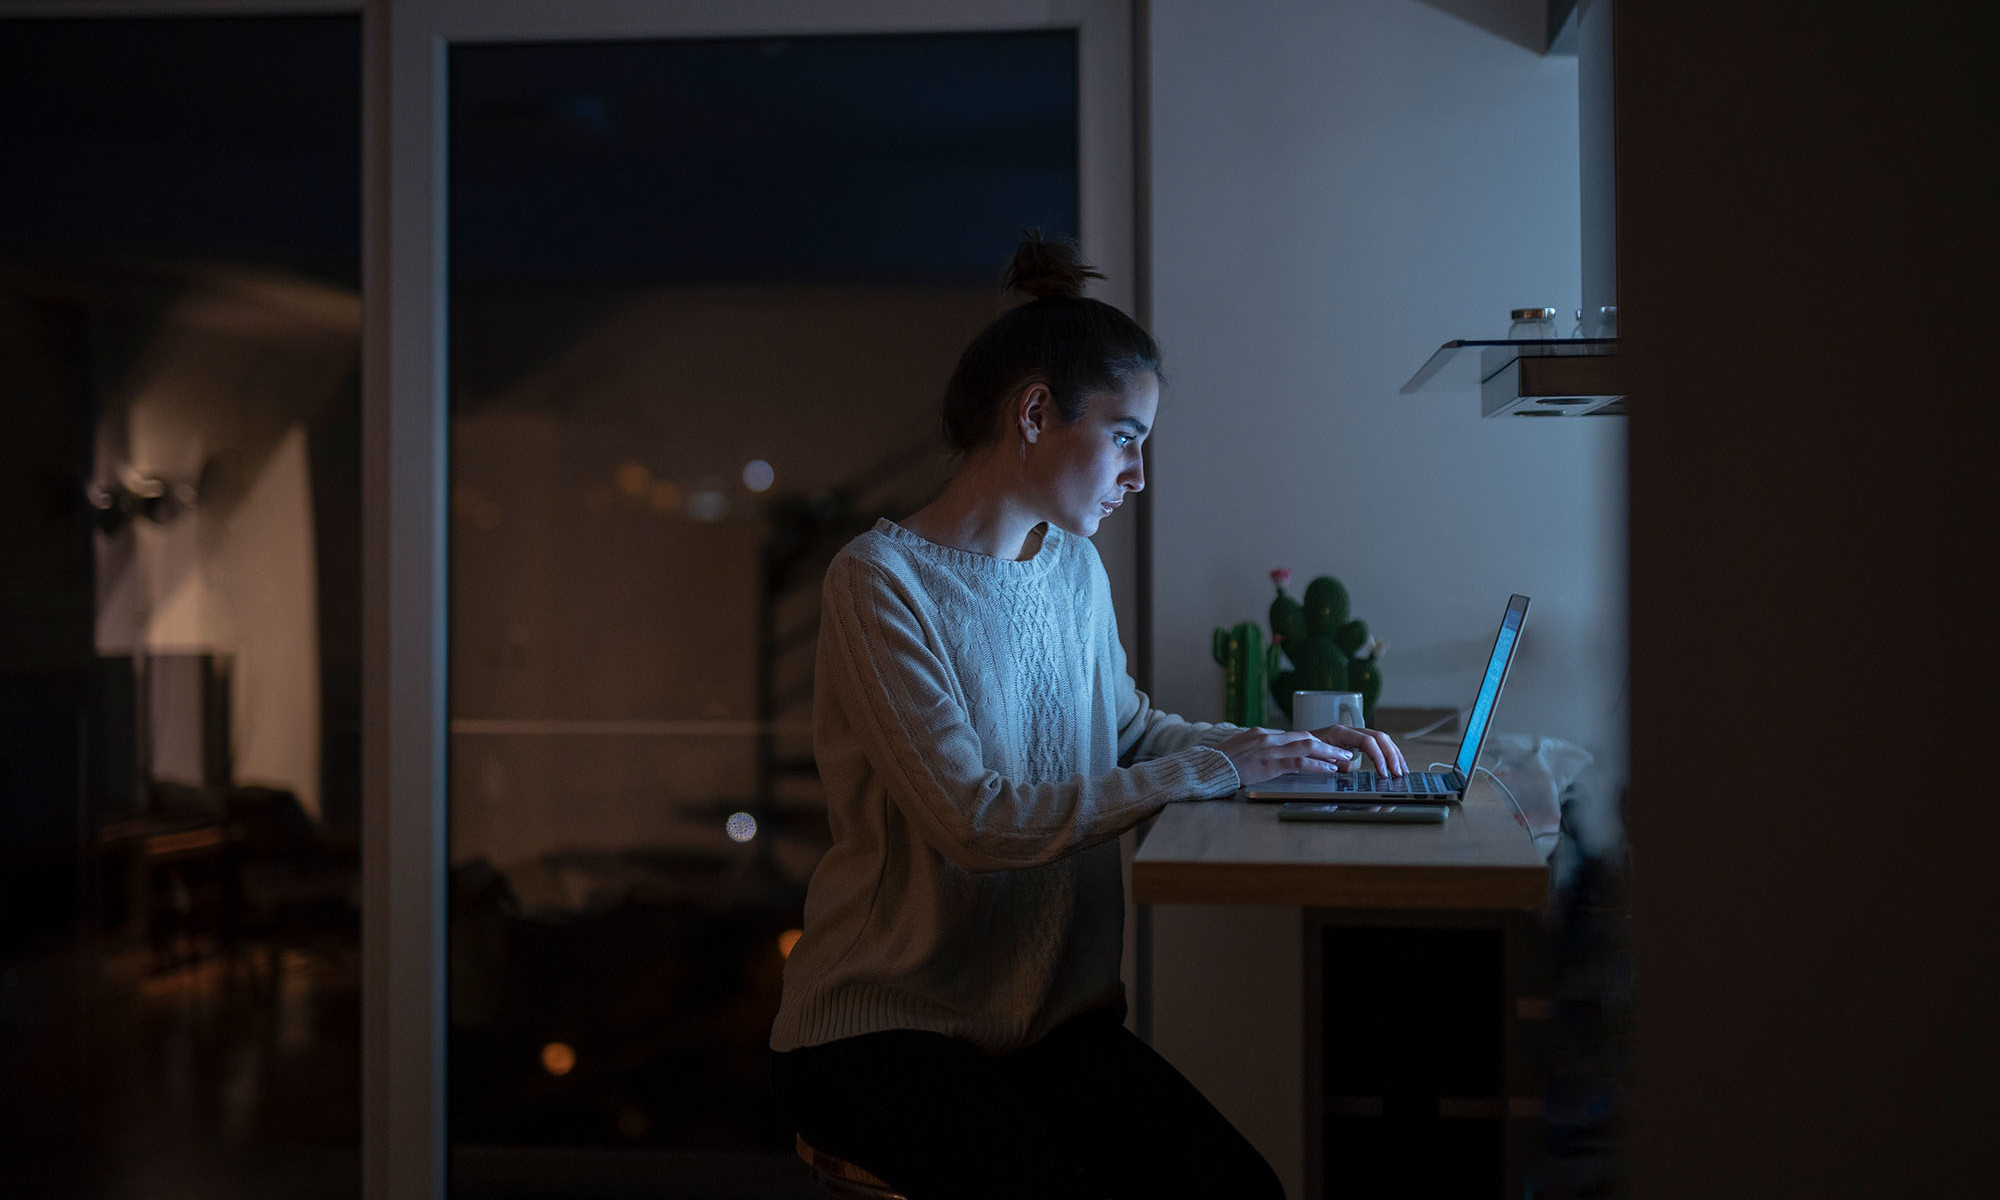 Study: Night Owls May Be More Prone To Negative Health Outcomes | mindbodygreen